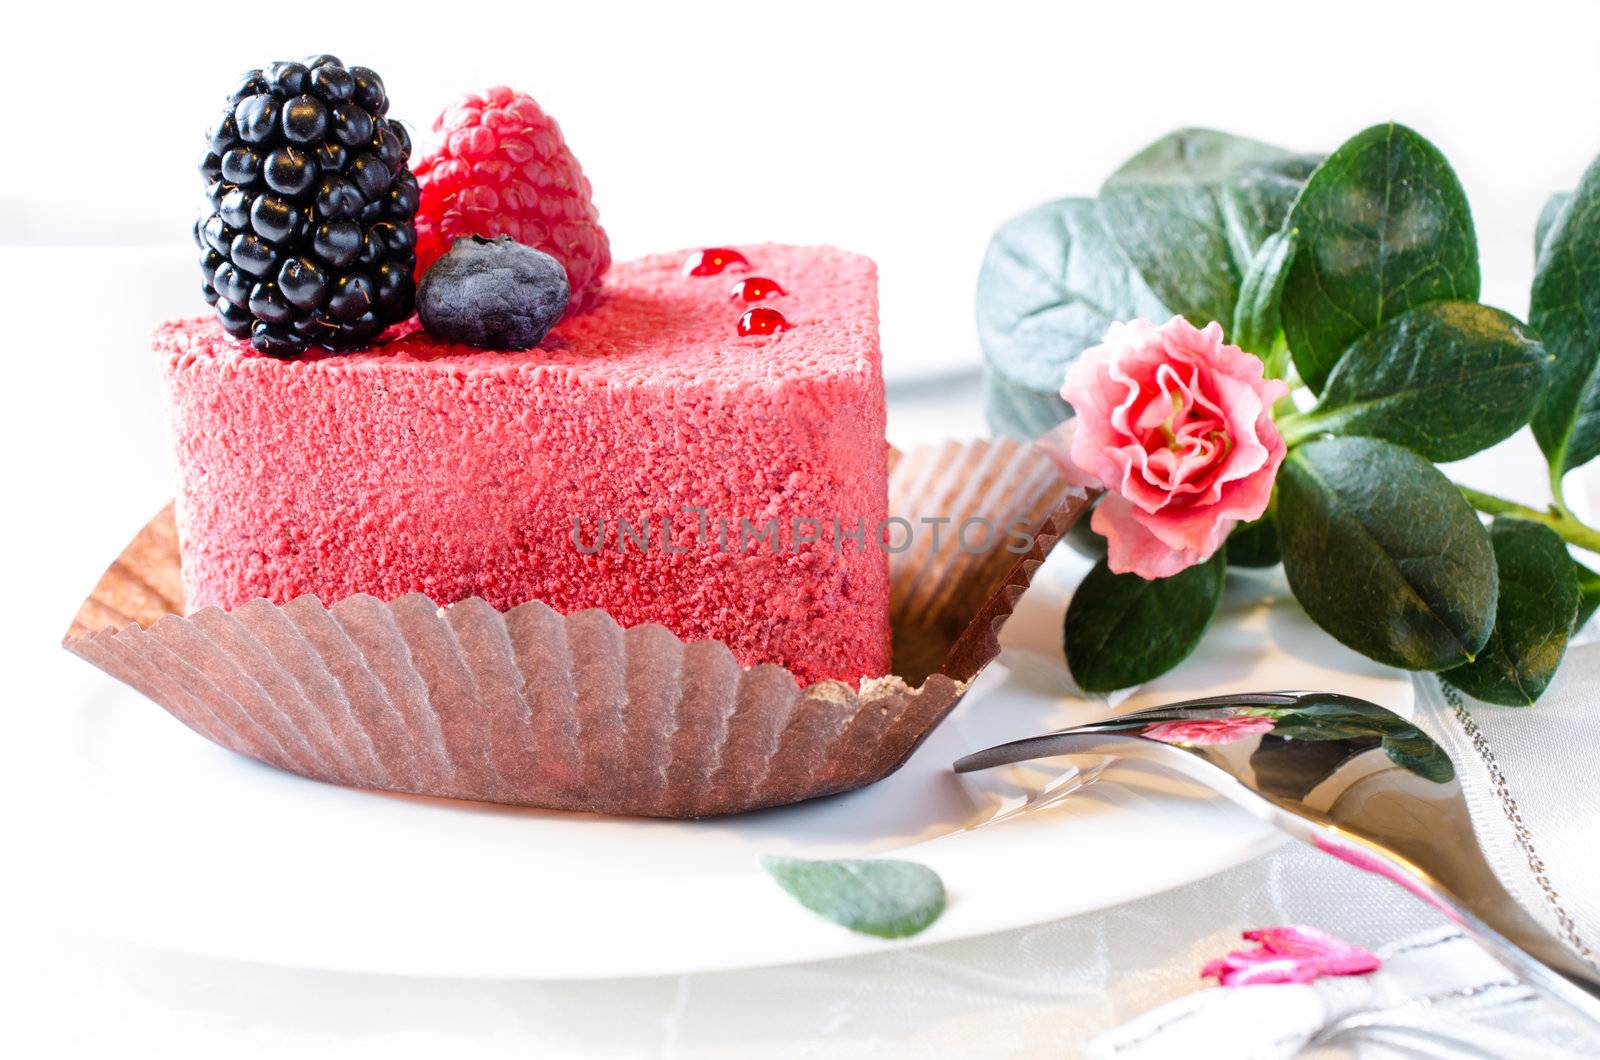 Red cake with berries by Nanisimova